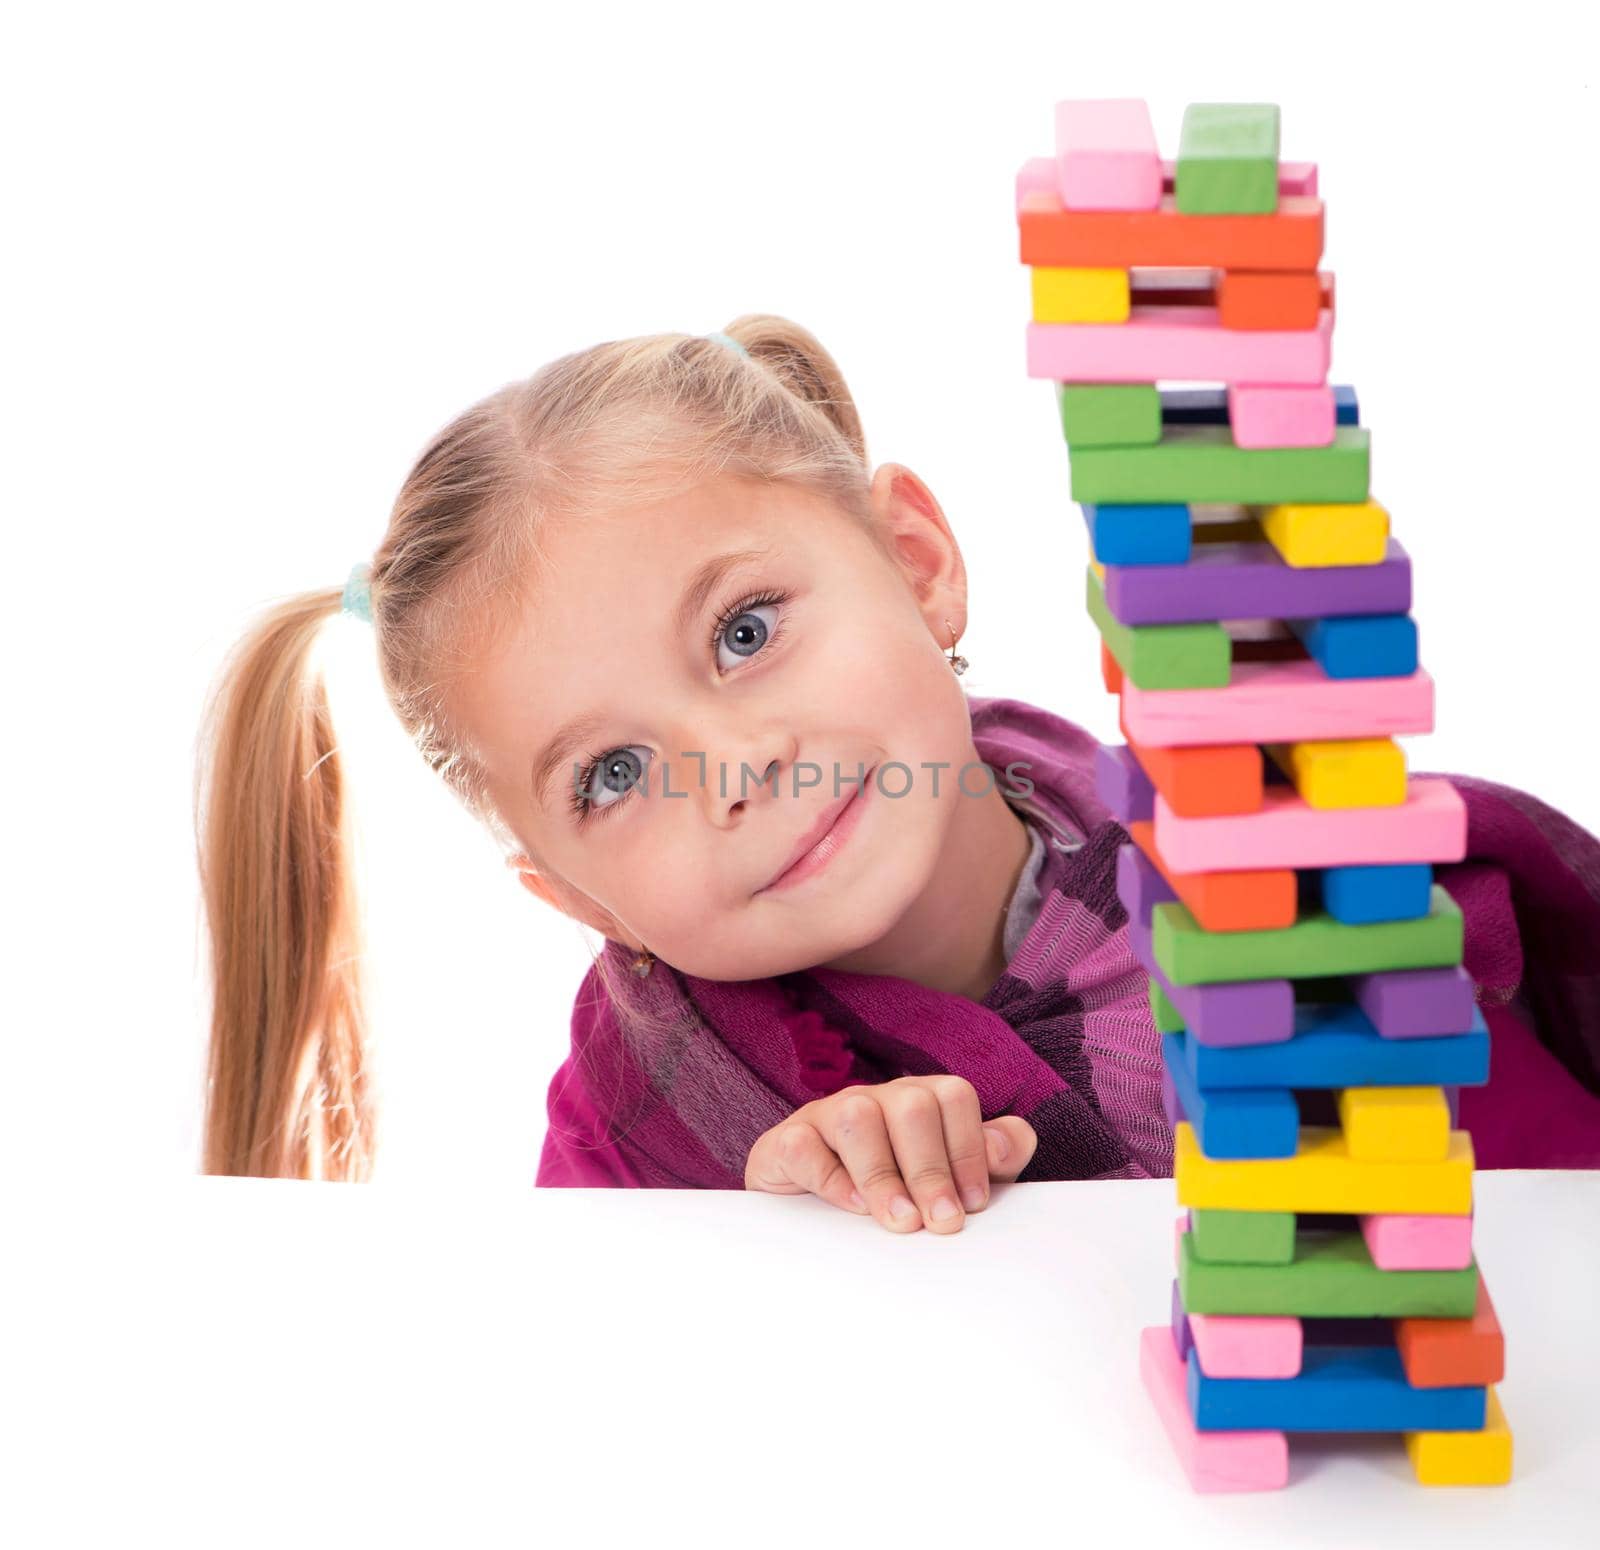 Children's hobbies, creativity, a little girl in a blue dress playing with the wood game jenga on white background by aprilphoto